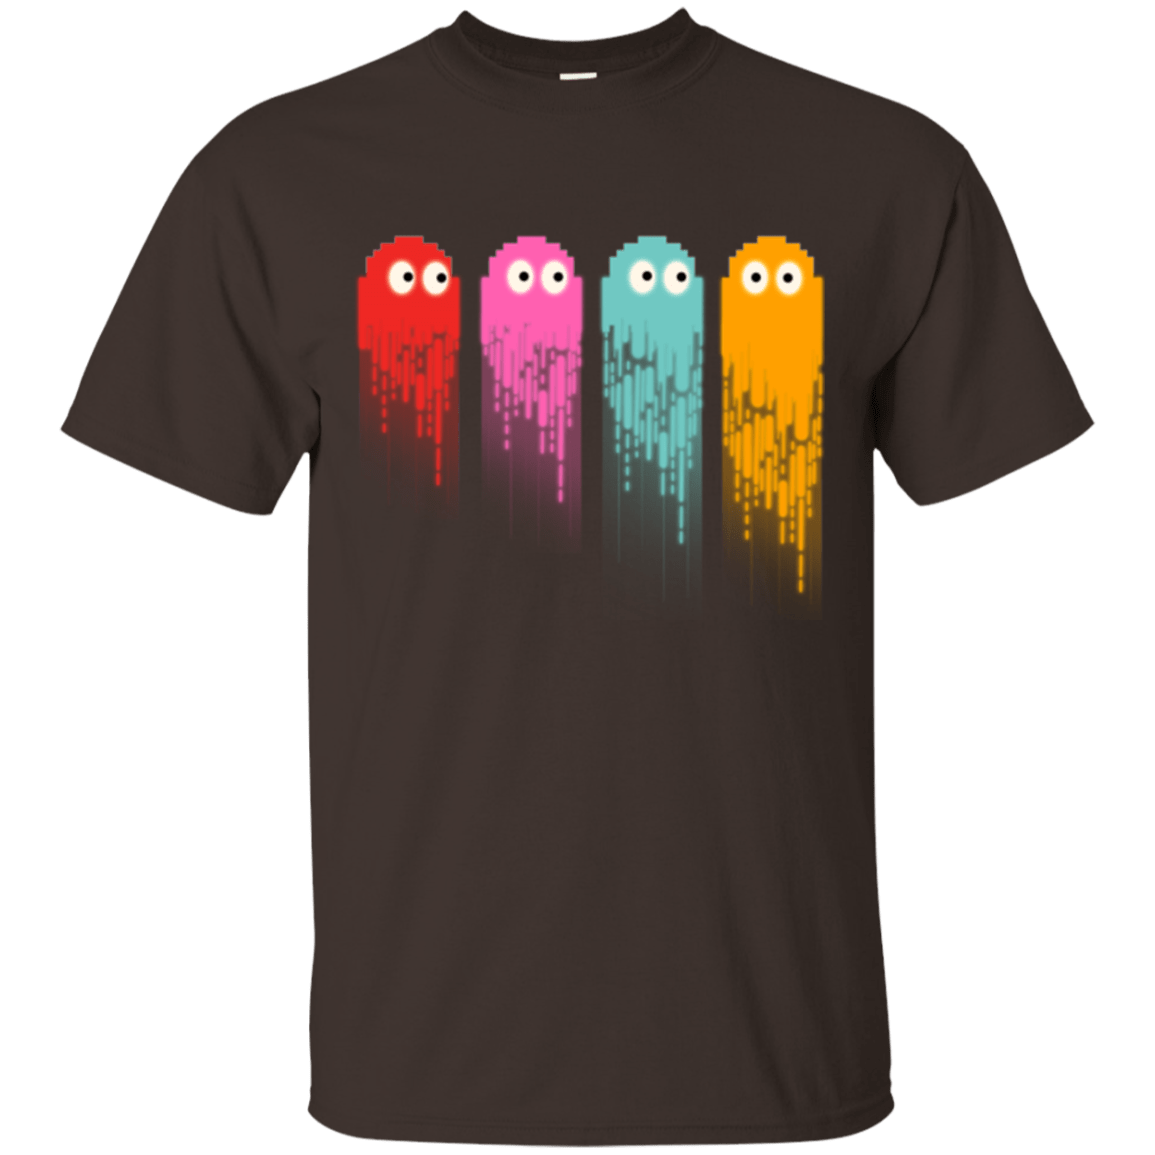 T-Shirts Dark Chocolate / Small Pac color ghost T-Shirt